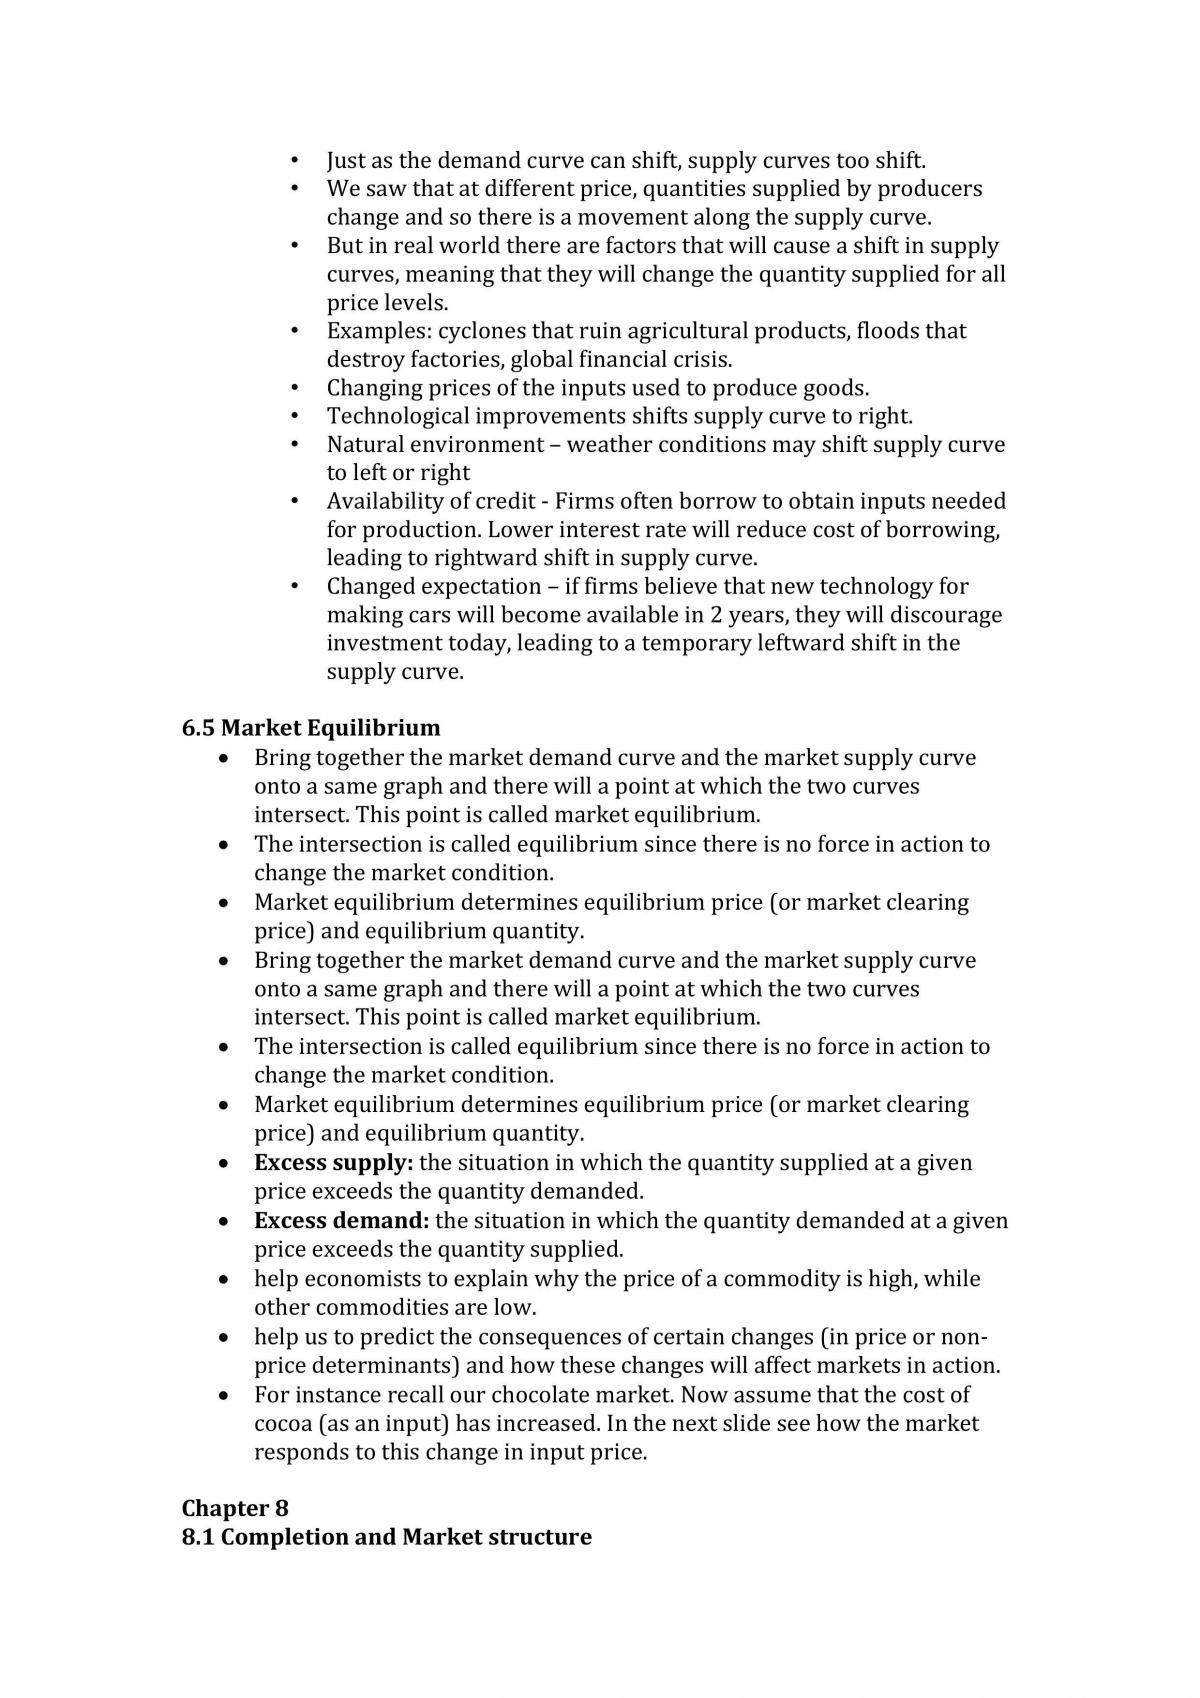 Enterprise Innovation and Market Notes - Page 18